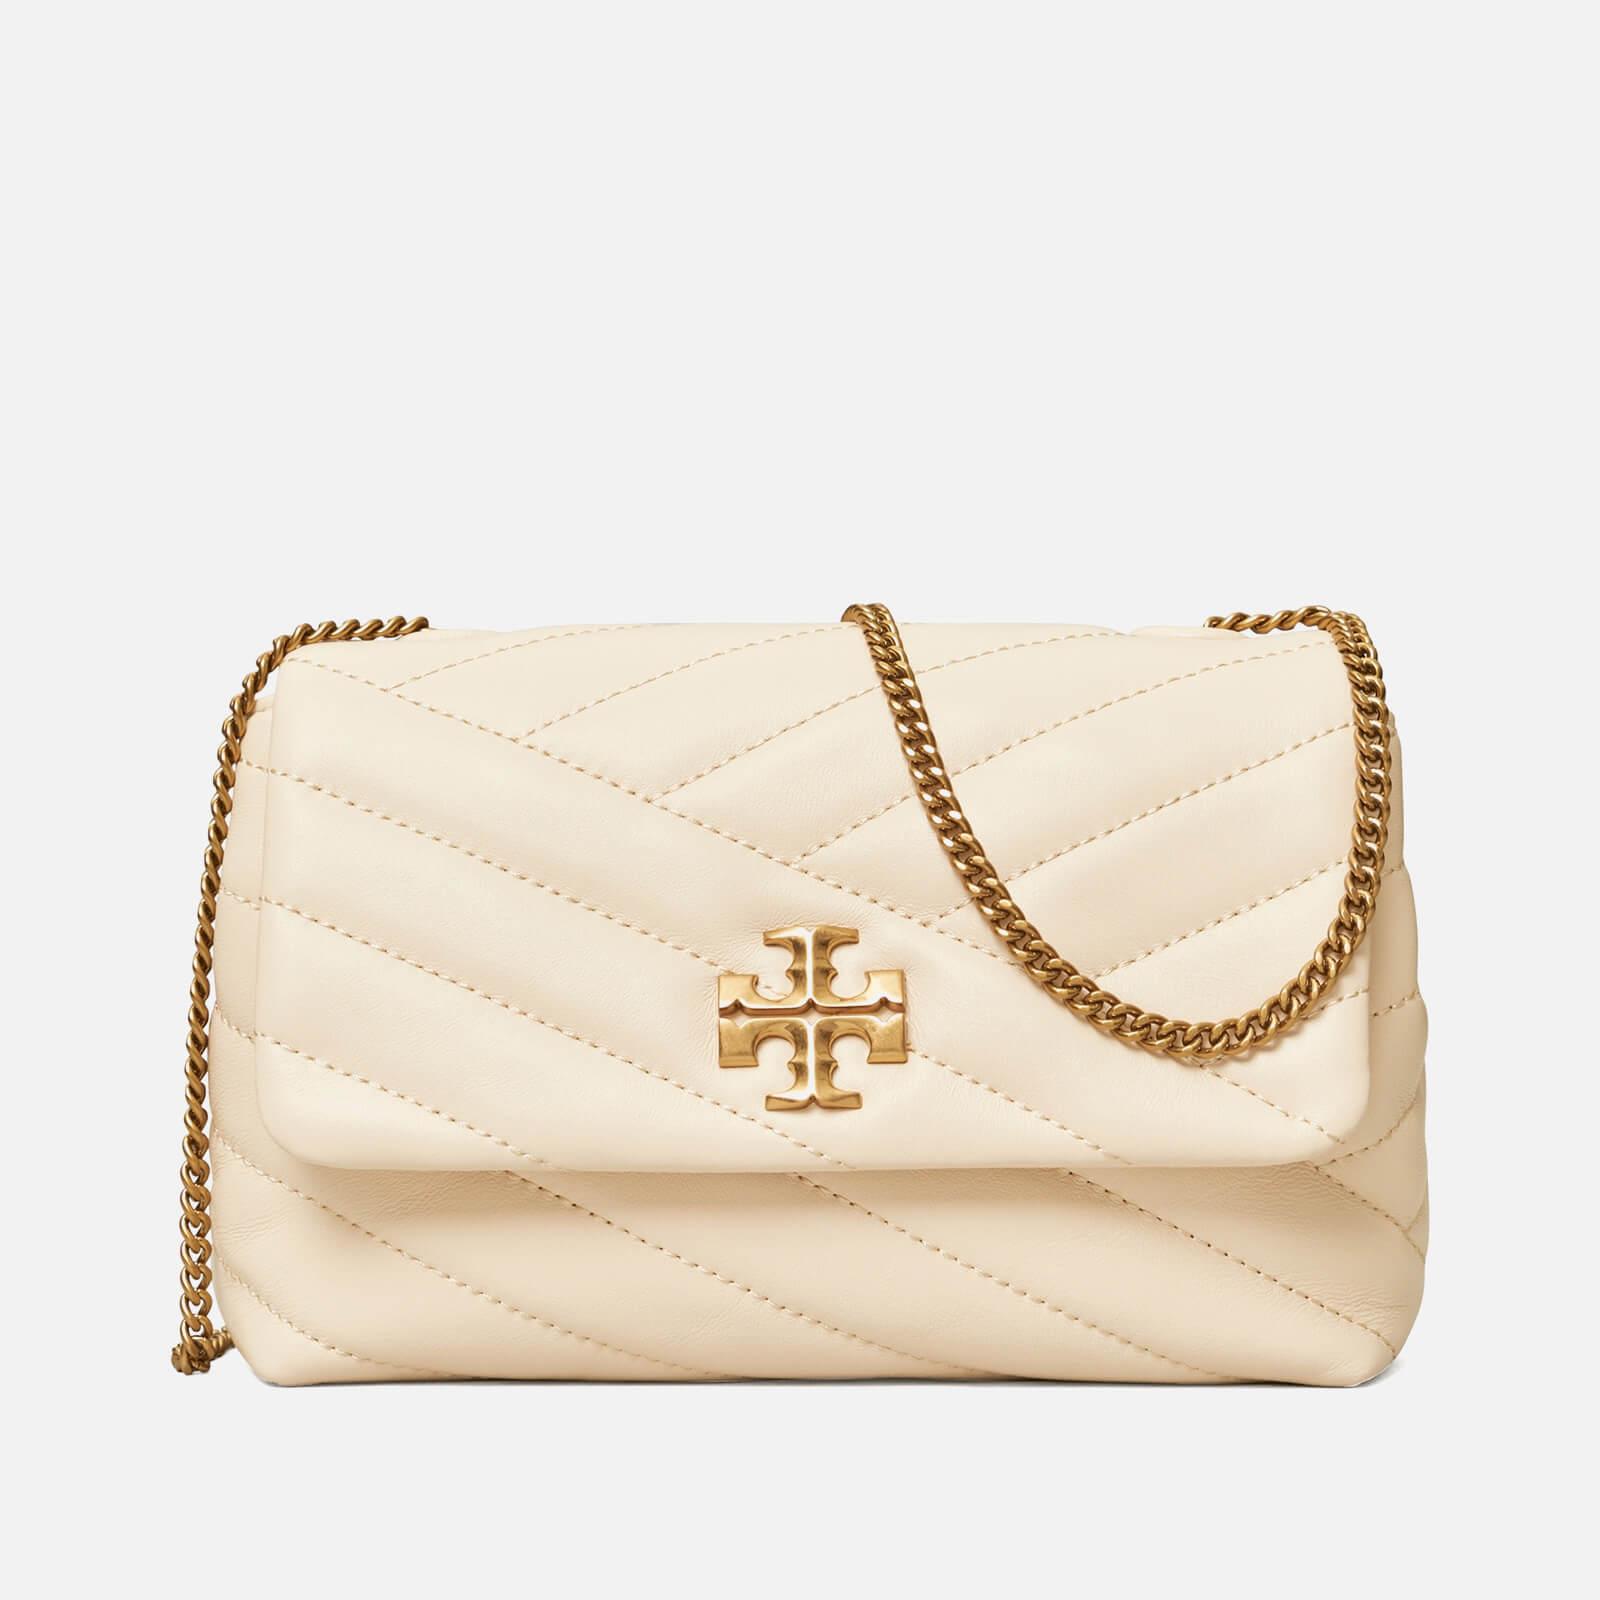 Tory Burch Kira Chevron Small Convertible Leather Shoulder Bag In New  Cream/rolled Brass